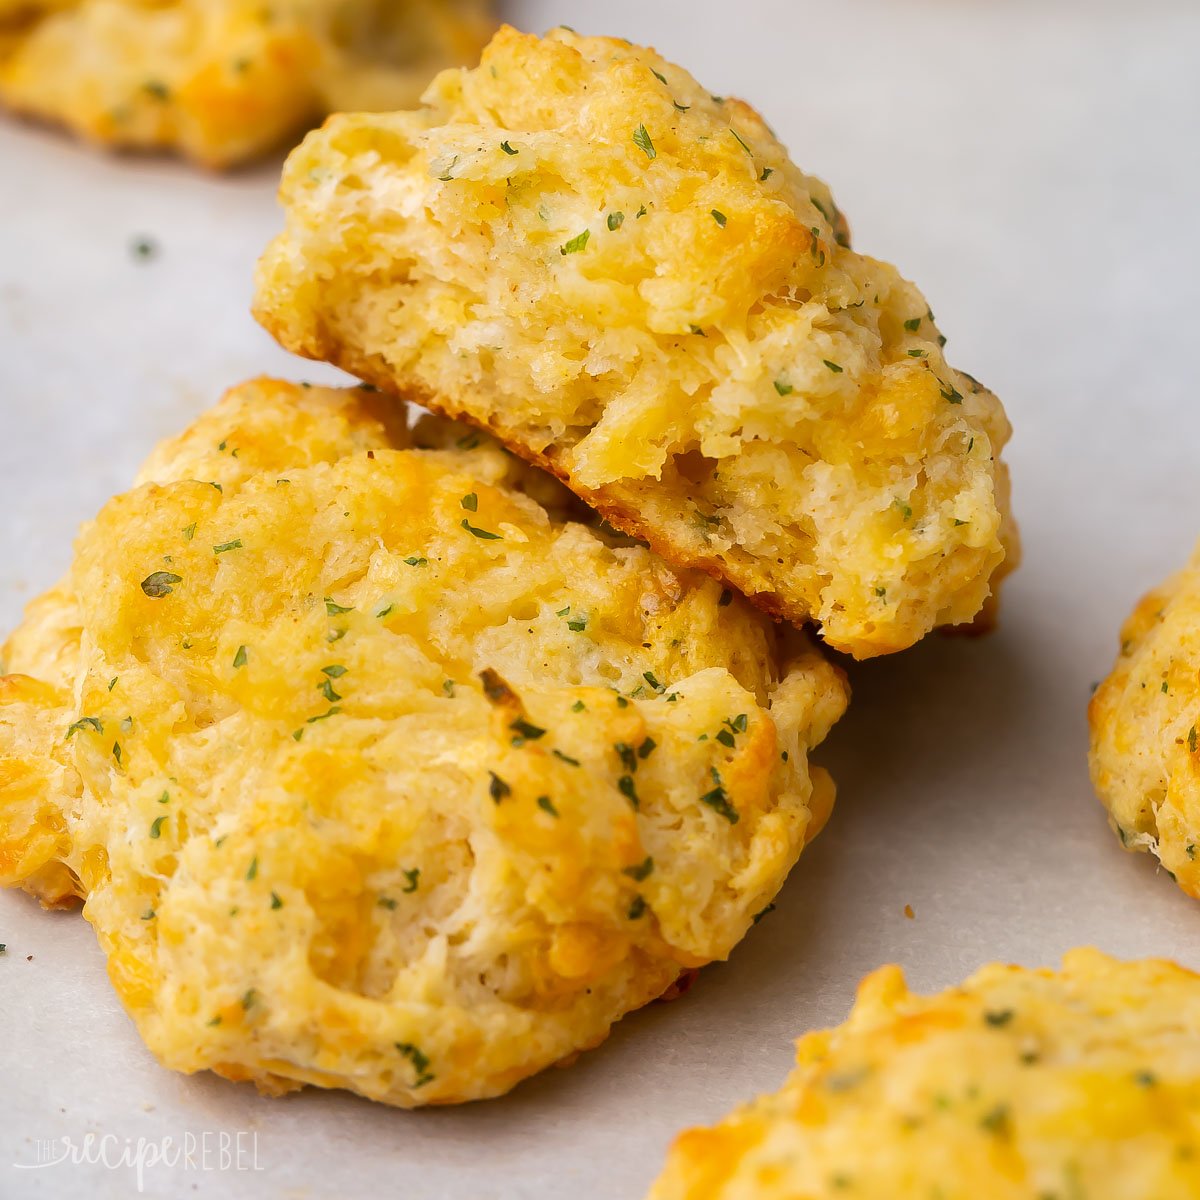 Homemade Cheddar Bay Biscuits - Red Lobster Copycat Recipe